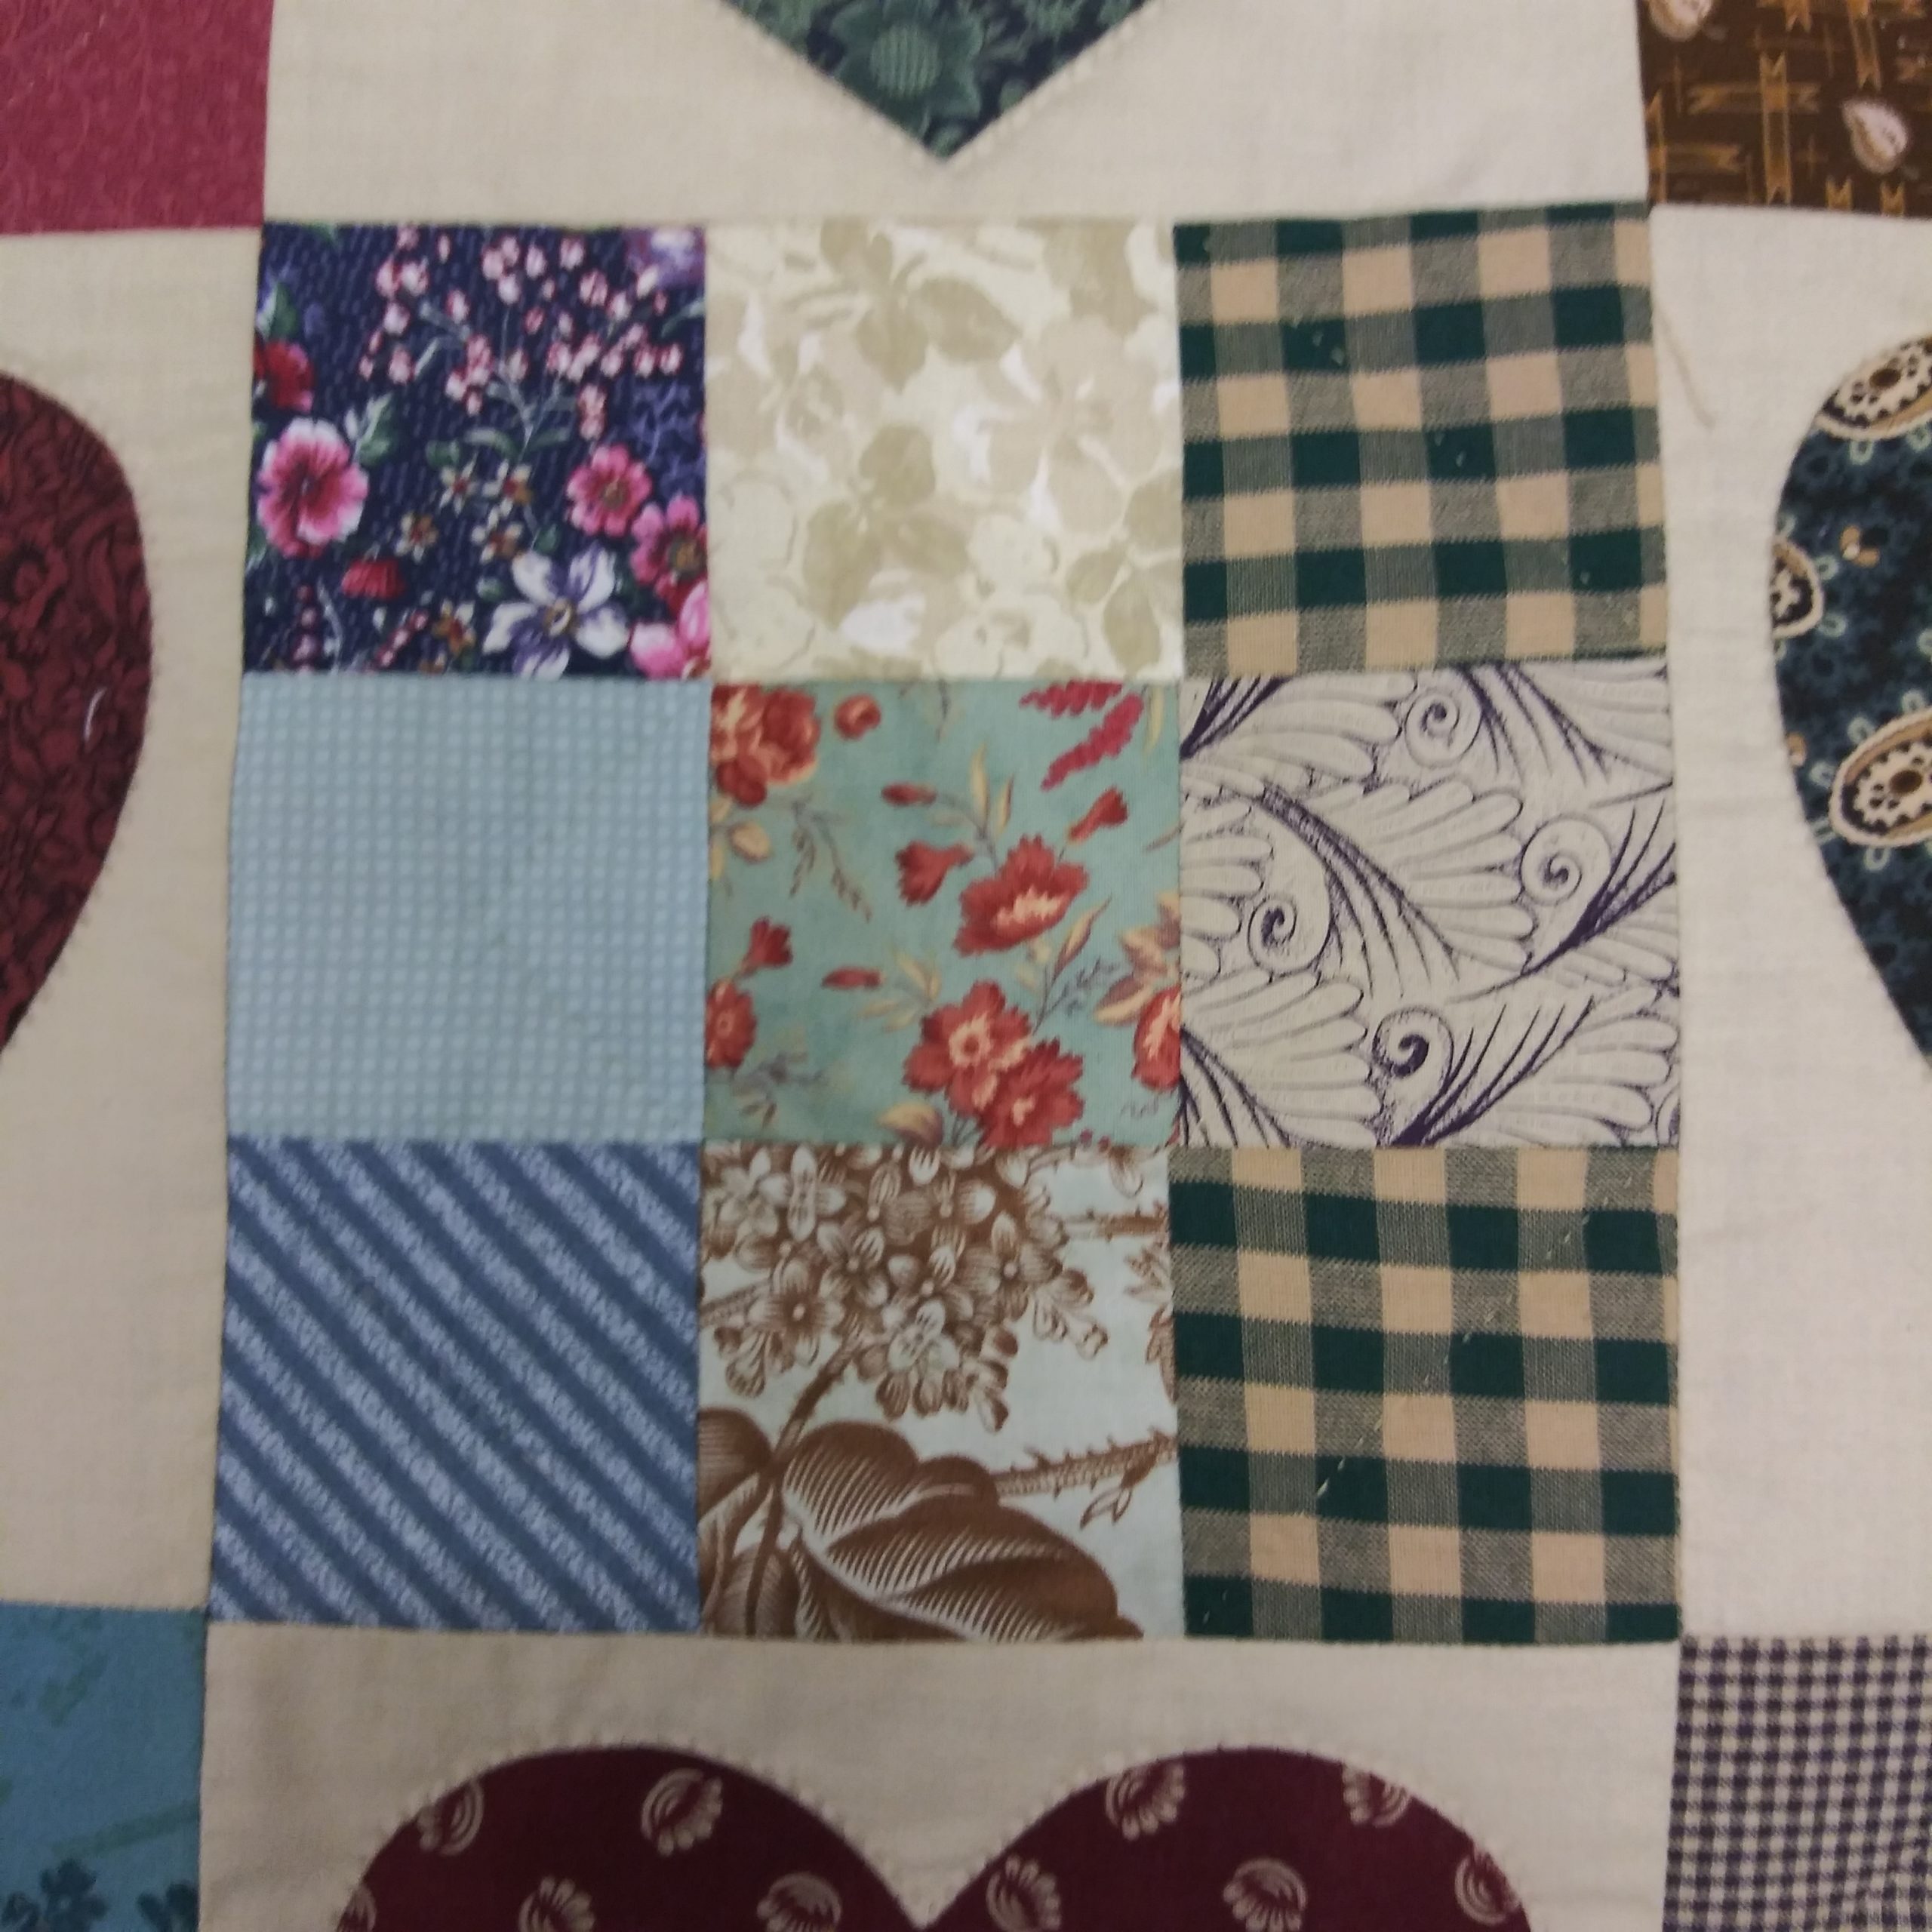 Quilts for Sale, Patchwork Quilt Handmade, Heirloom Quilt, Quilting Gifts,  Patch Work, Bedding Quilt, Handmade Cover, Blanket, Wall Hanging, 